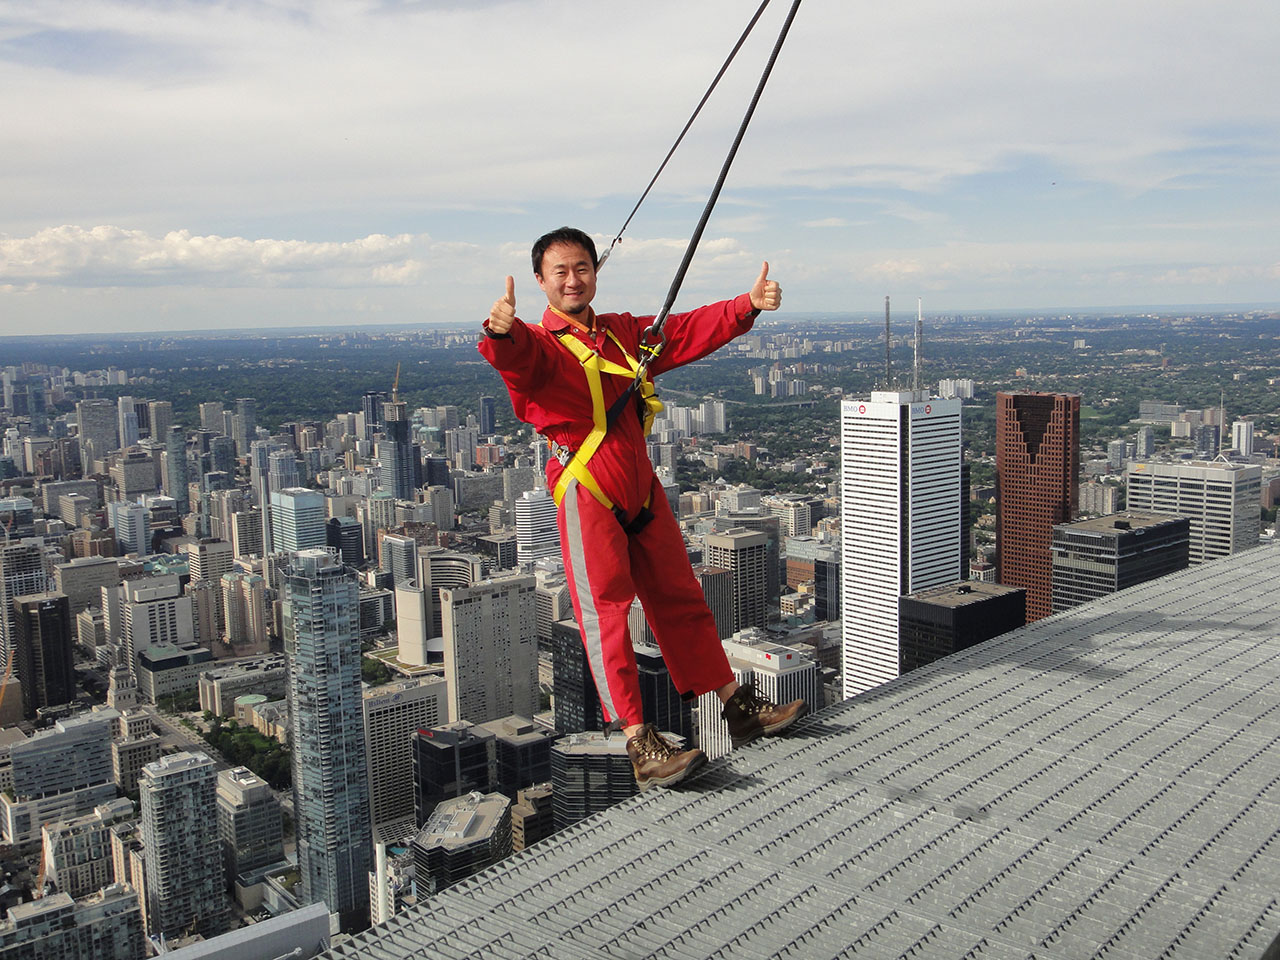 CN Tower Edgewalk! There is nothing like living on the edge, 365 metres above the city! Photo courtesy Jae June Han, Substations